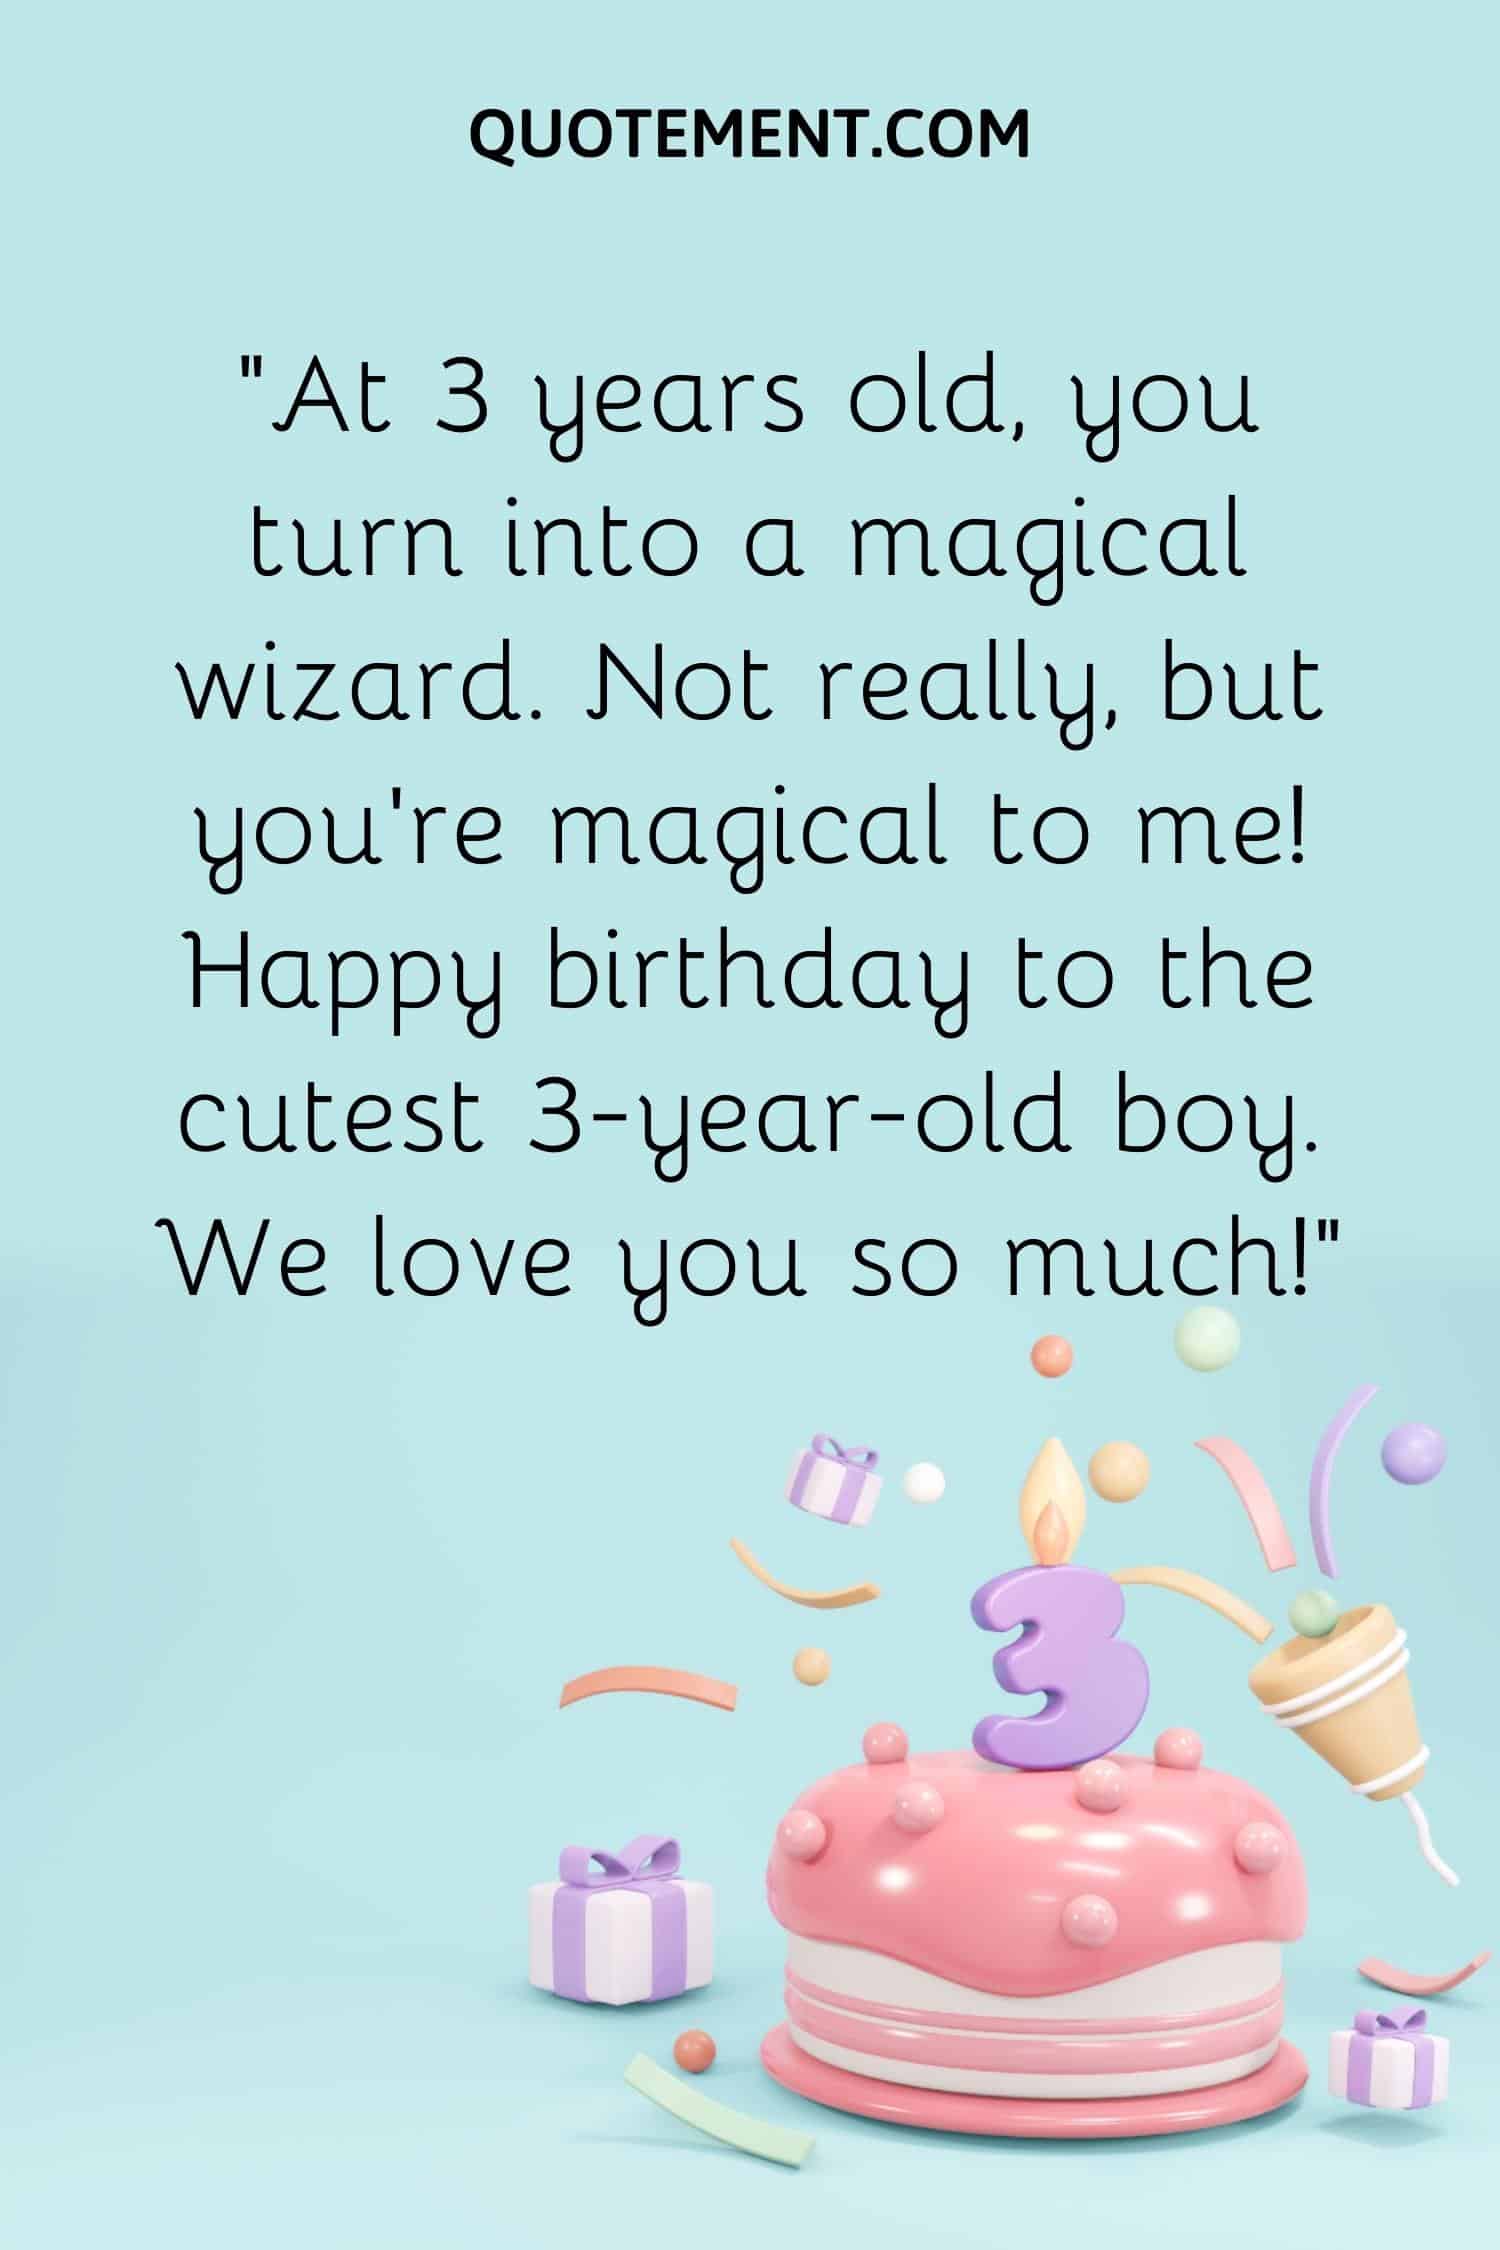 “At 3 years old, you turn into a magical wizard. Not really, but you’re magical to me! Happy birthday to the cutest 3-year-old boy. We love you so much!”